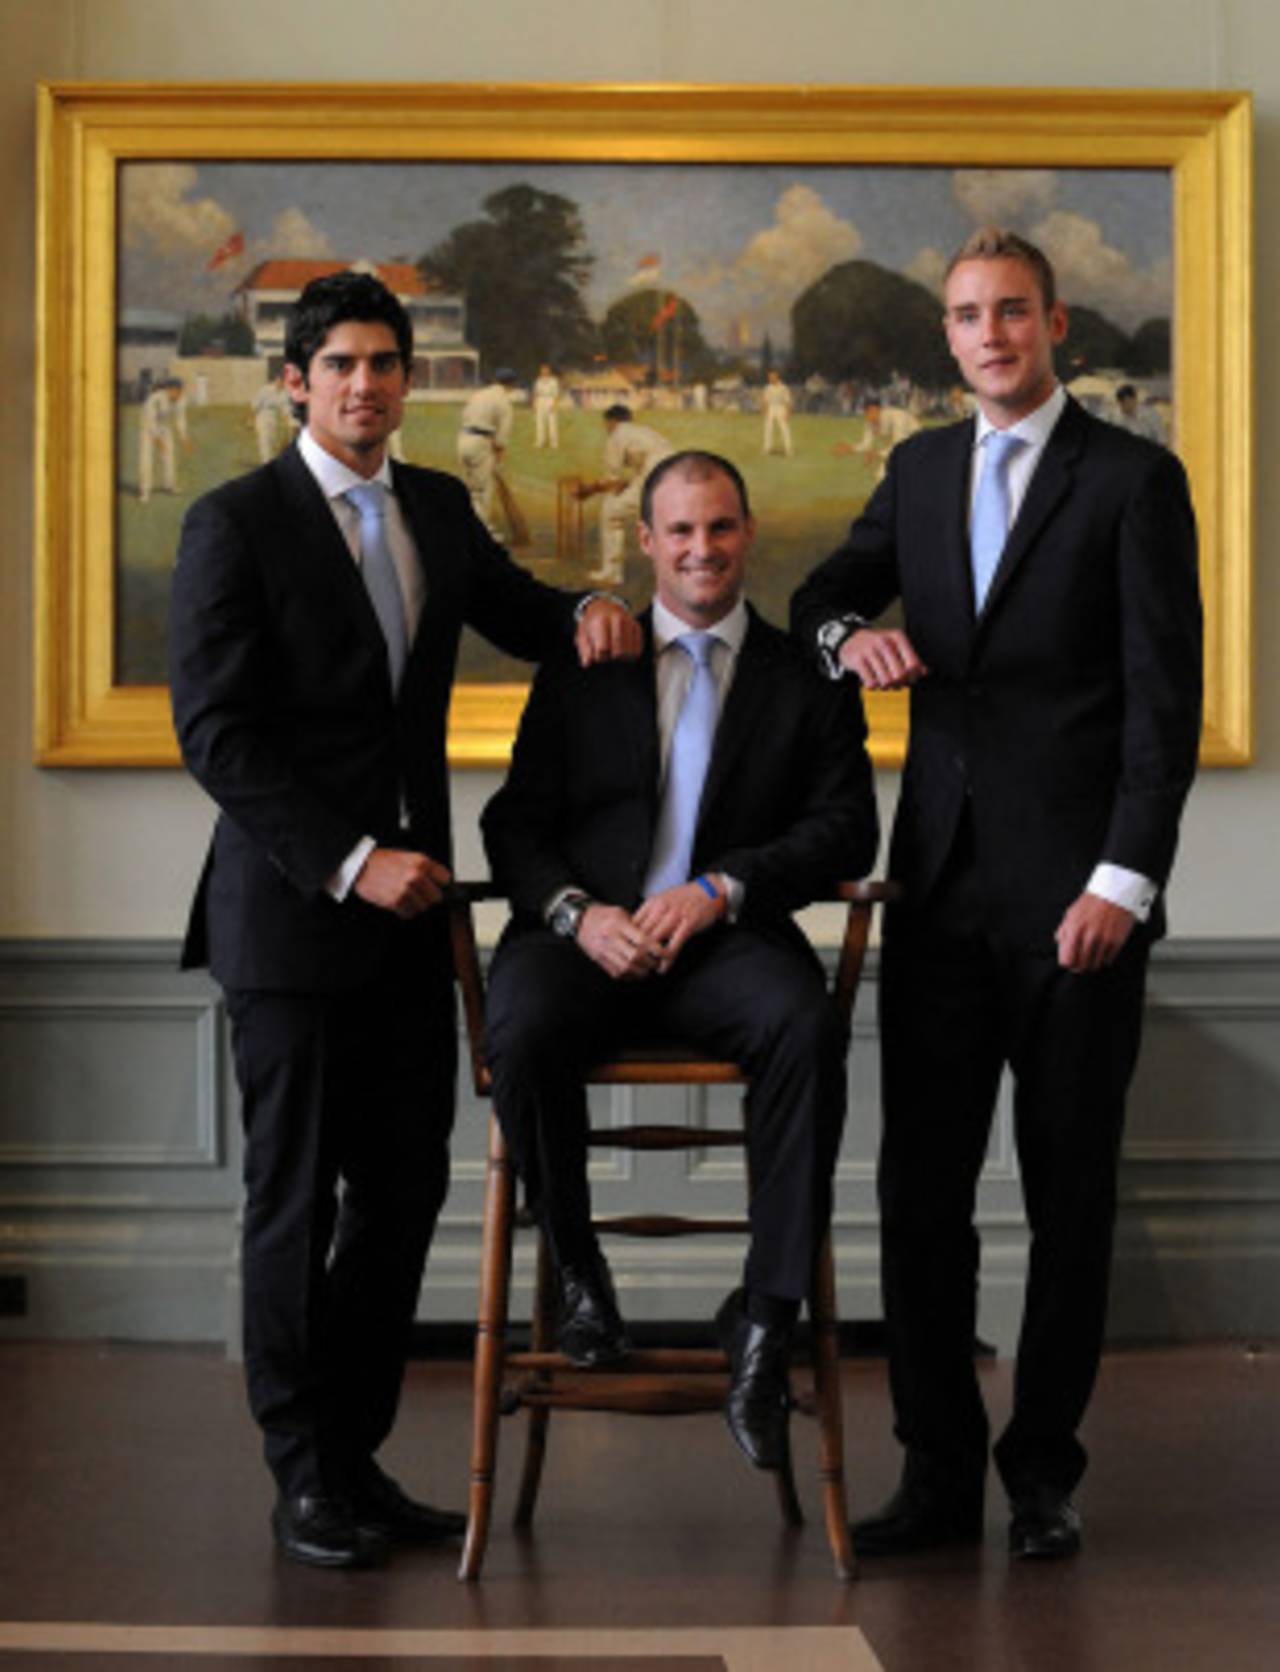 Alastair Cook, Andrew Strauss and Stuart Broad, England's captains in the game's three formats, at Lord's, London, May 5, 2011